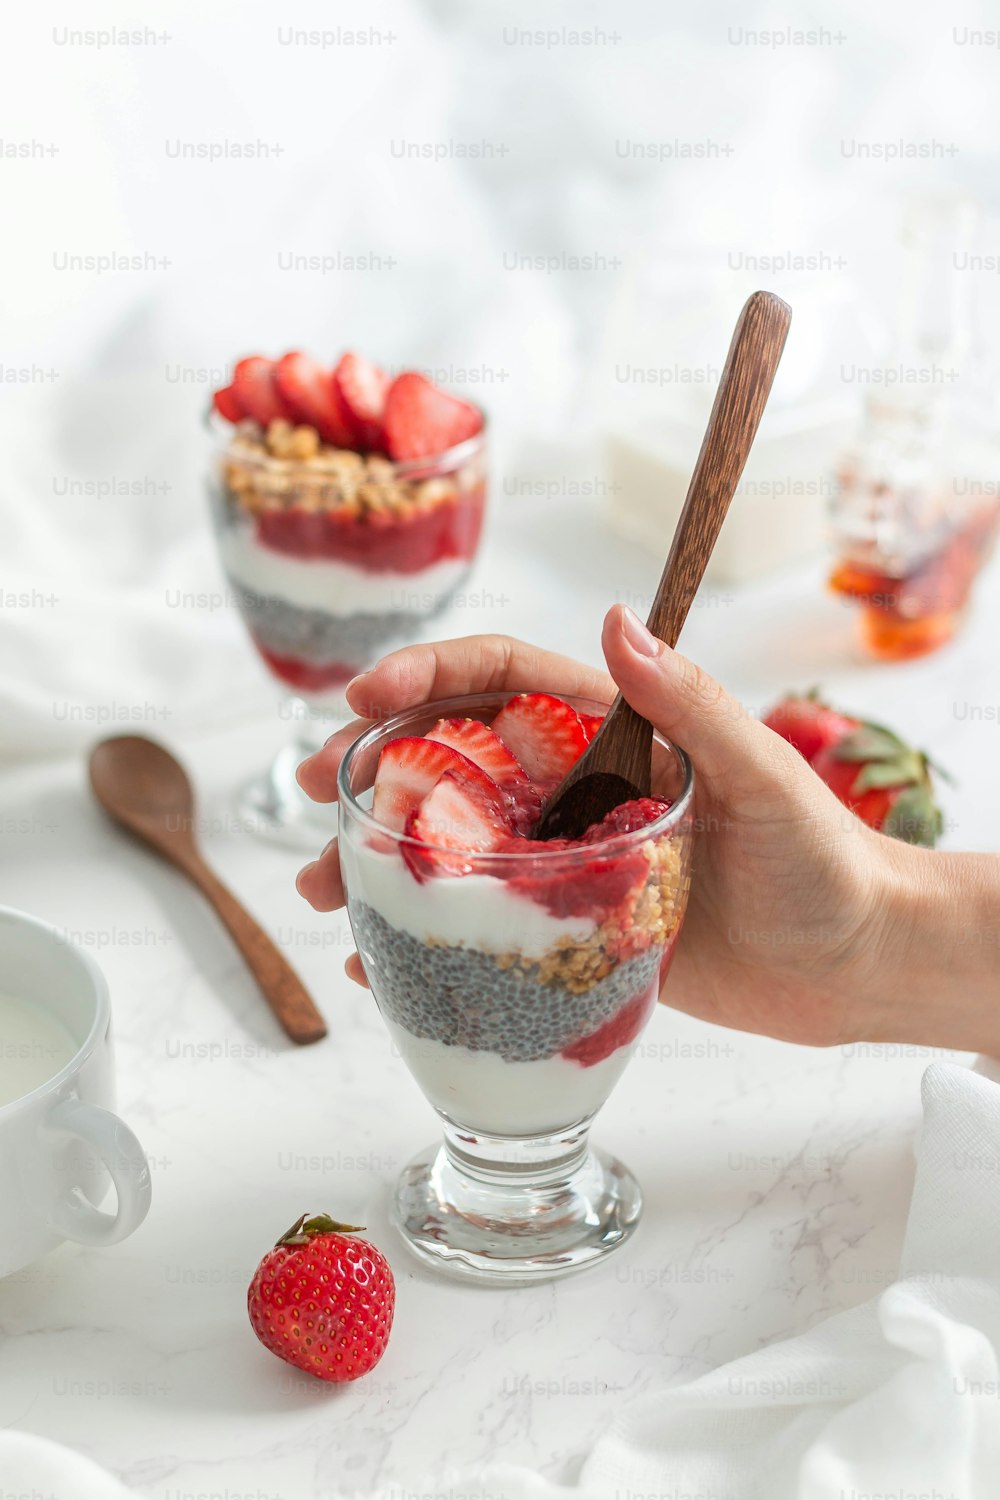 a person holding a spoon over a dessert in a glass